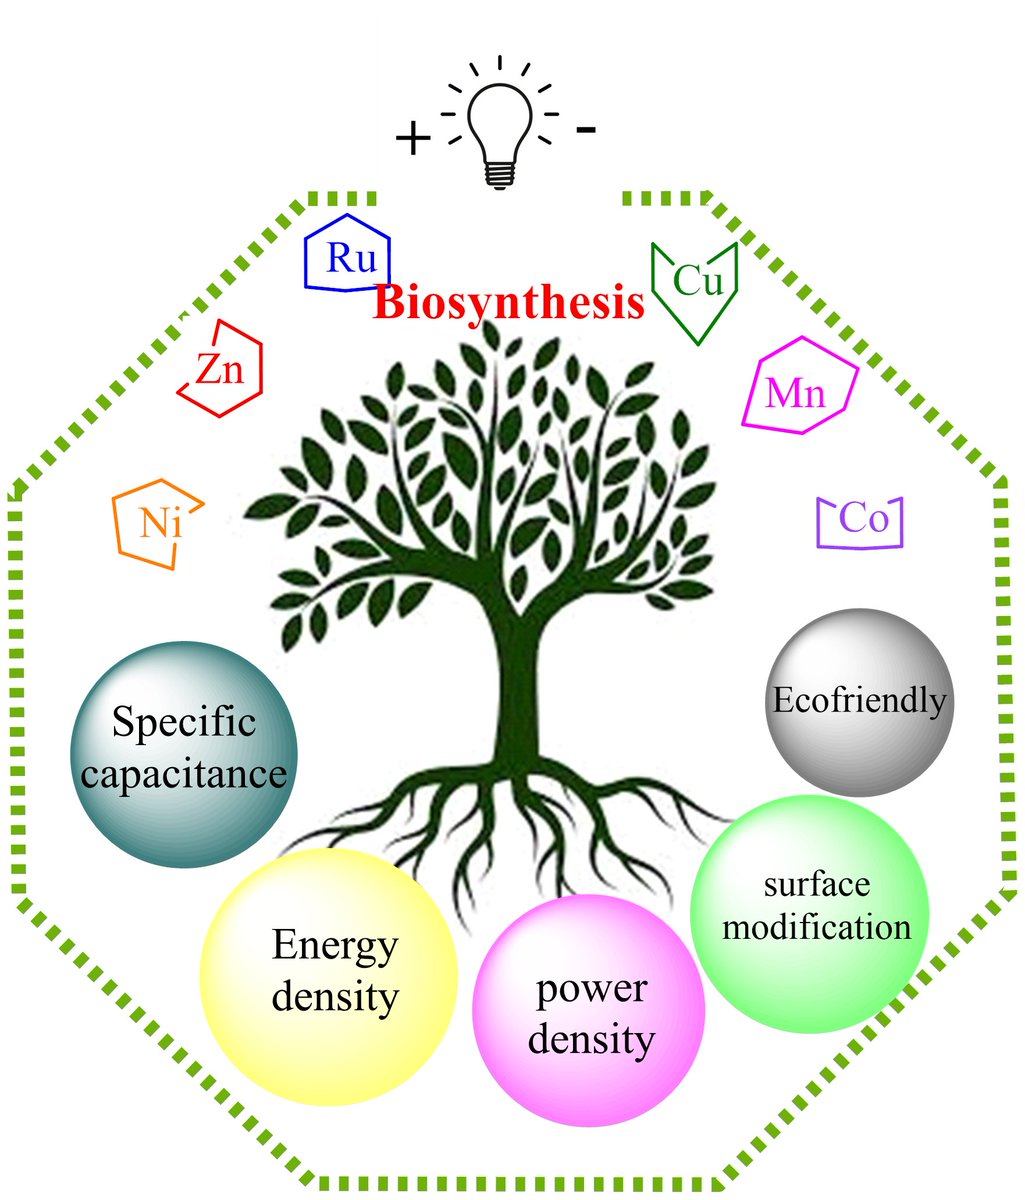 Check out our new #OpenAccess paper in #RSCSustainability by Jayaprakash Meena et al.: 'Green supercapacitors: review and perspectives on sustainable template-free synthesis of metal and metal oxide nanoparticles' #Sustainability → doi.org/10.1039/D4SU00…